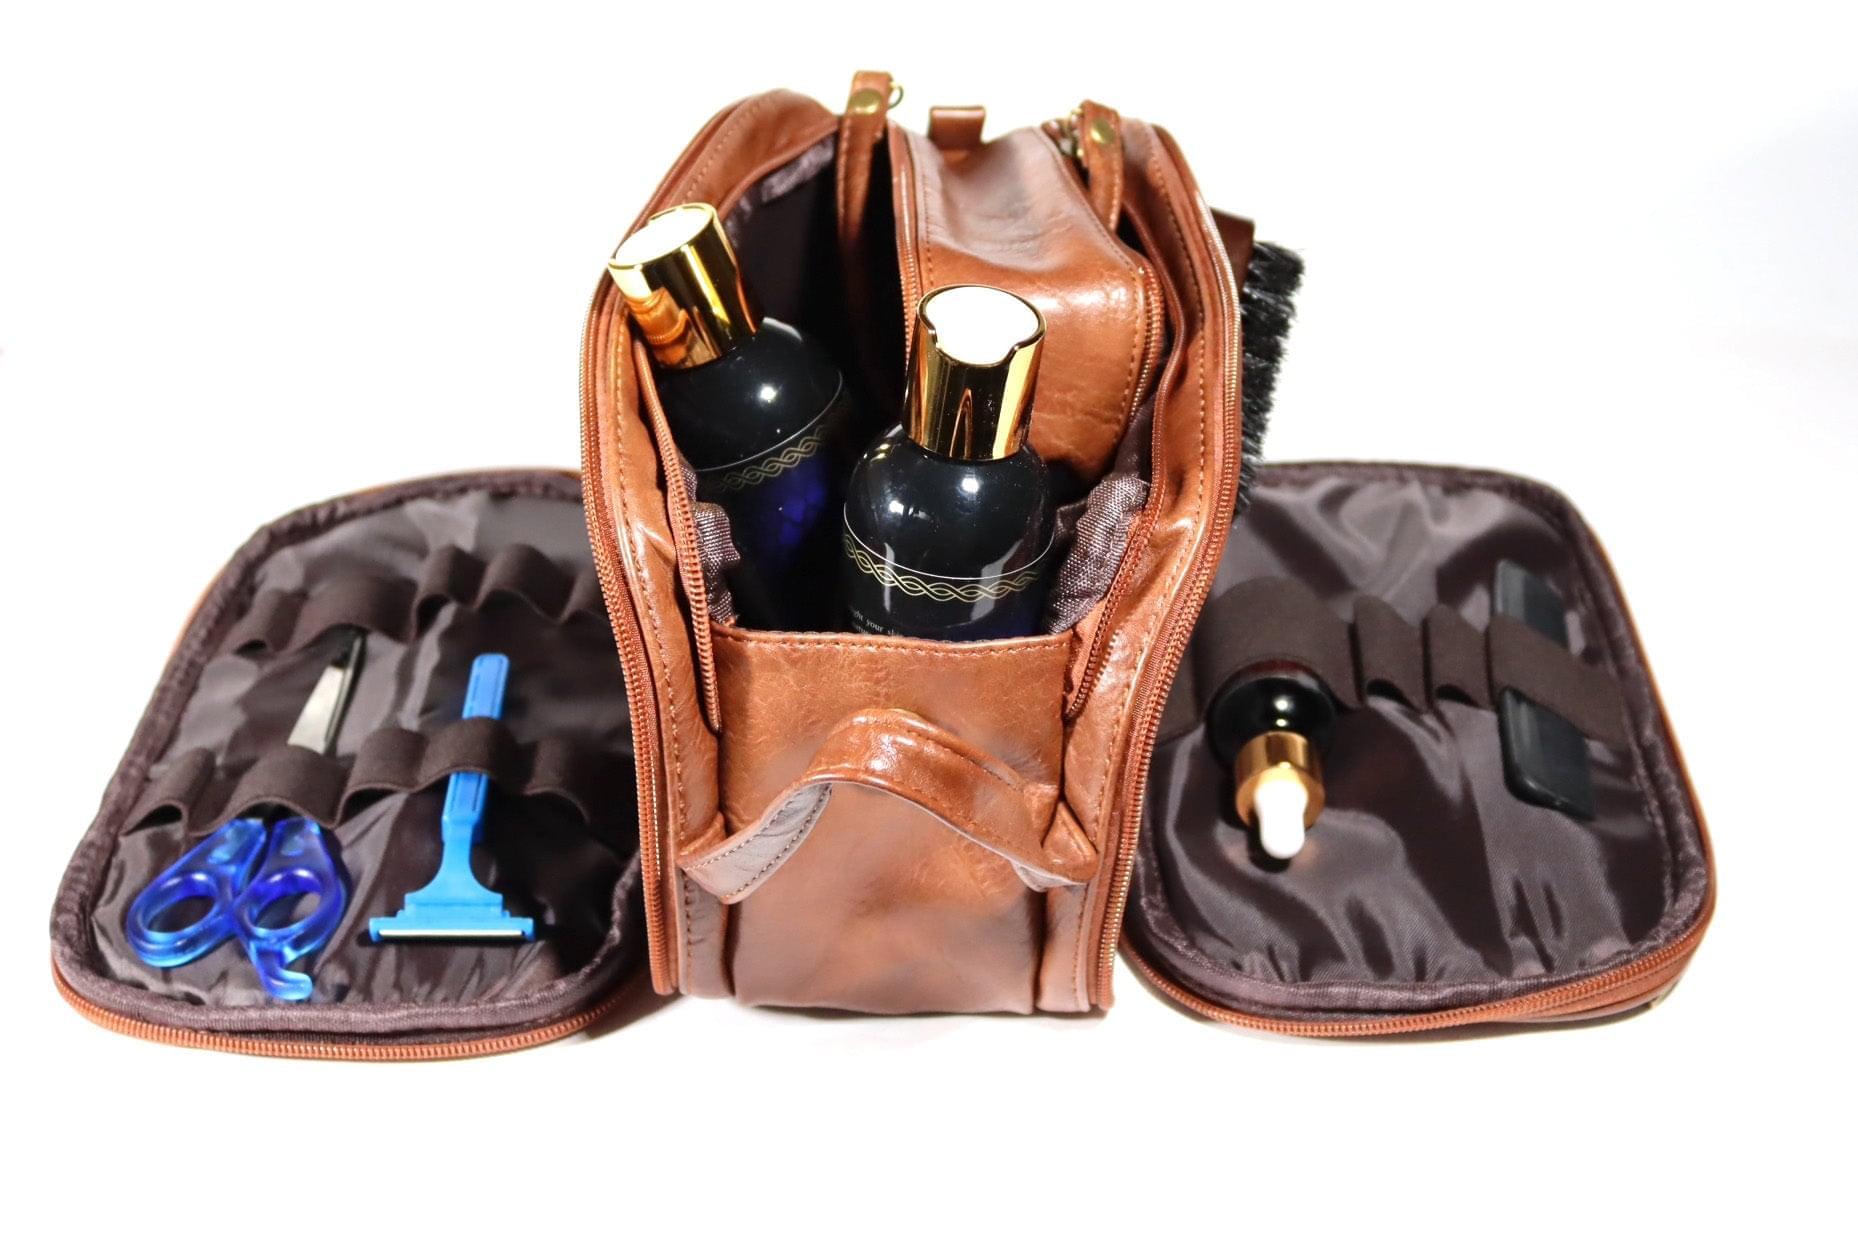 Large Men’s Leather Toiletry Bag For Men&gt;s Grooming Essentials Cognac Blac